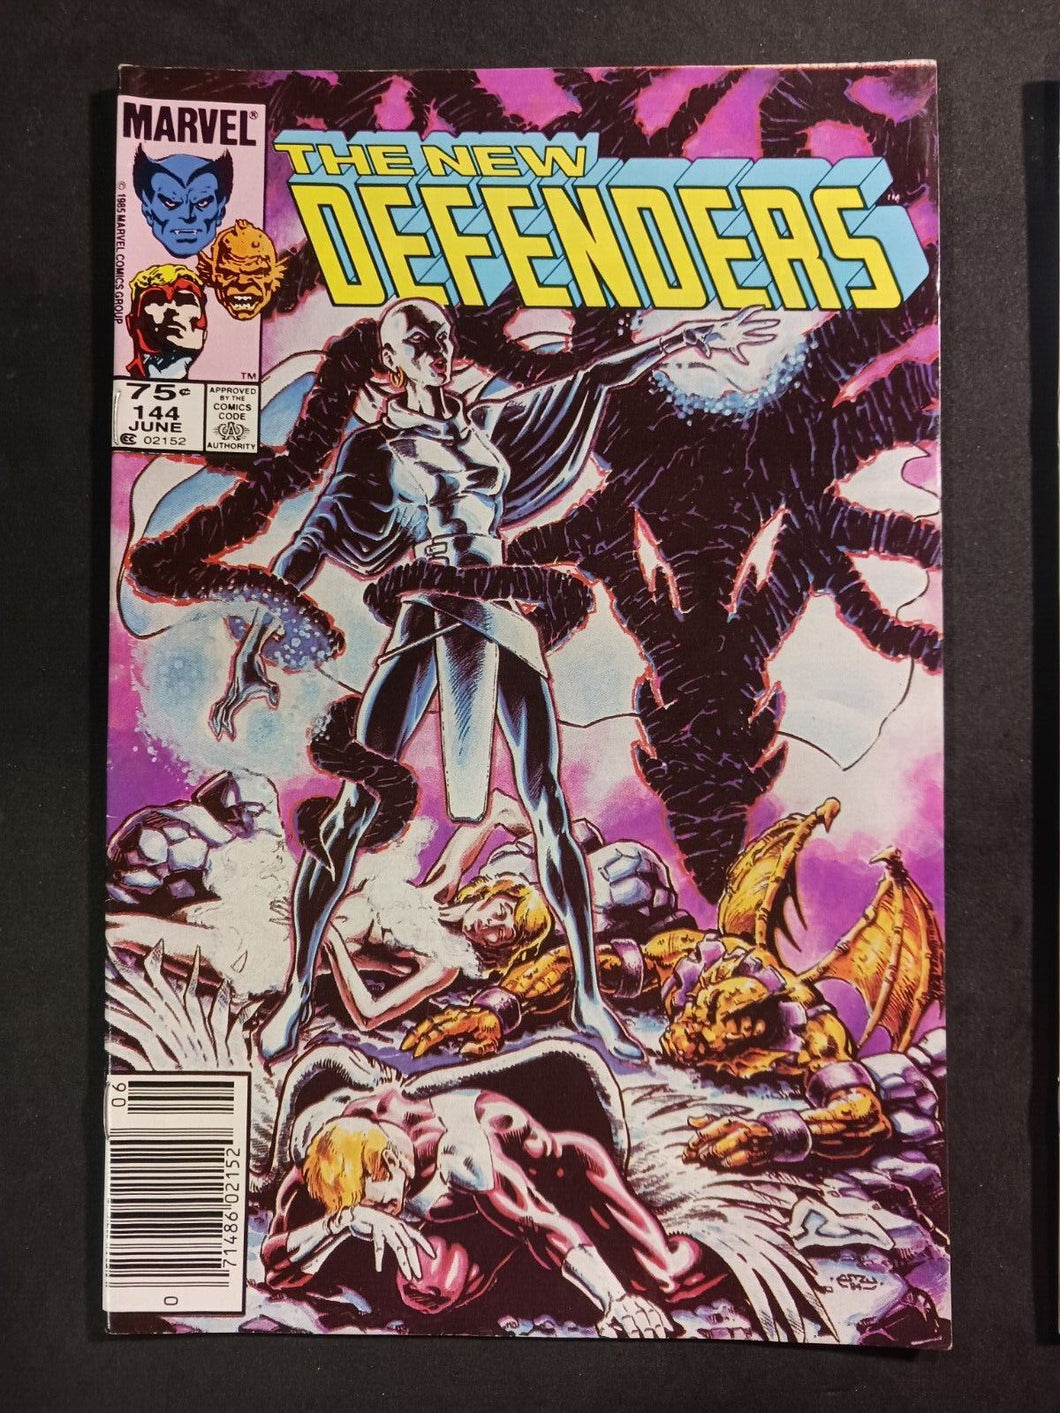 1985 The New Defenders #144 Marvel Comics, CPV, Newsstand, High Grade